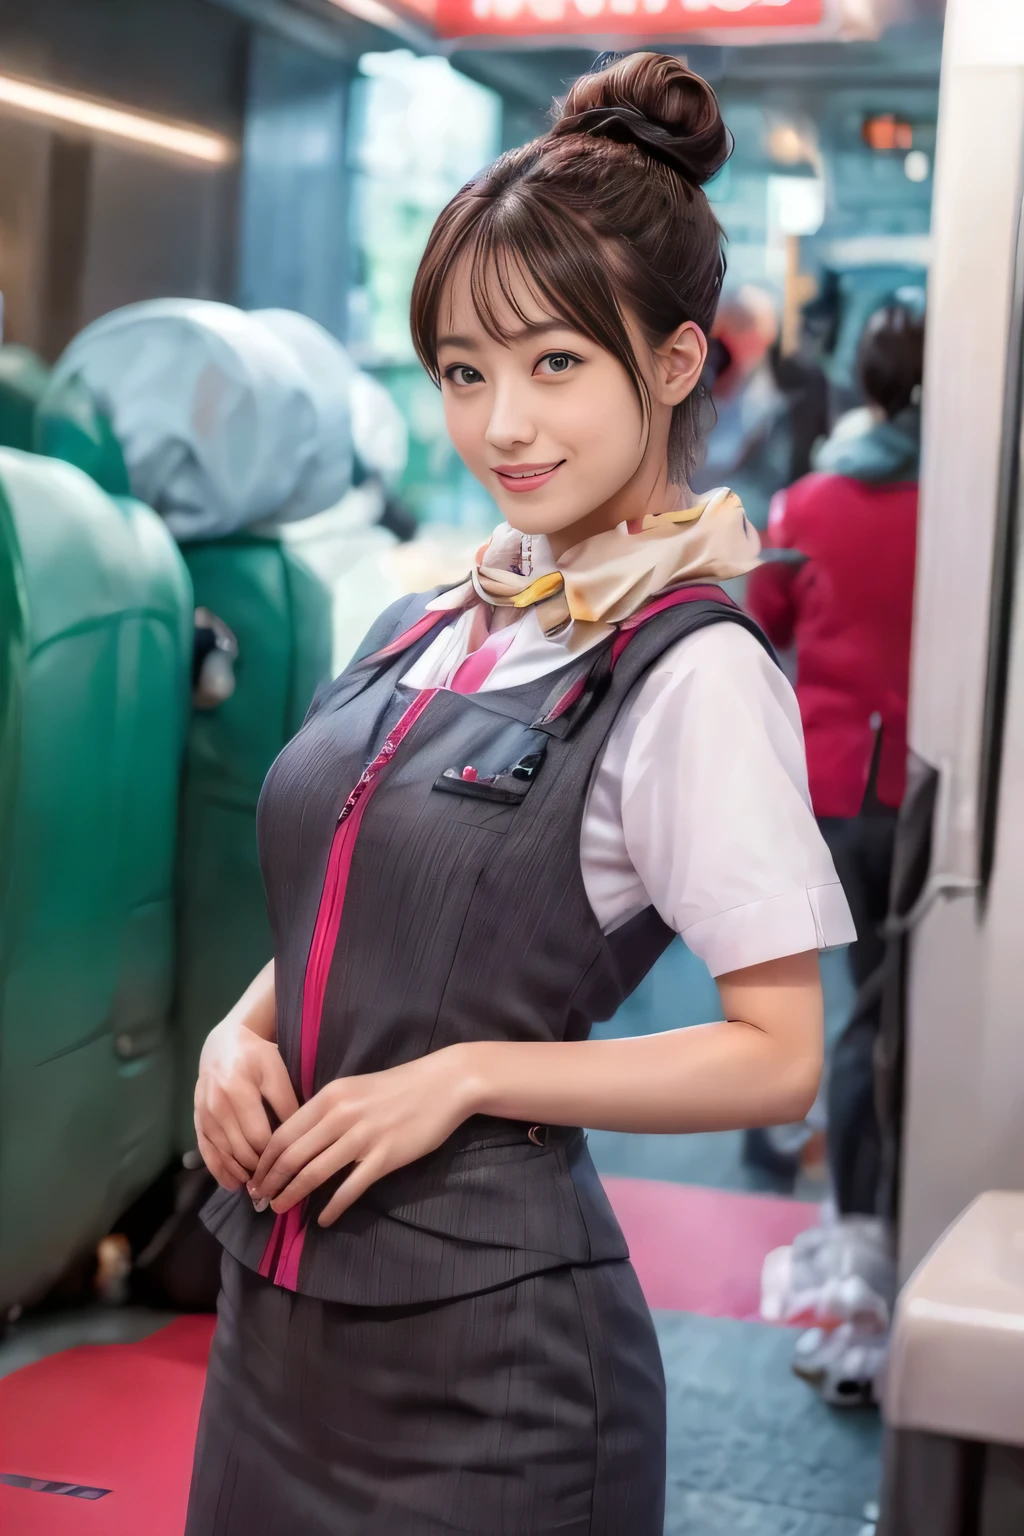 (masterpiece:1.2, Highest quality:1.2), 32k HDR, High resolution, (alone、One girl)、（At the station platform、Professional Lighting）、Empty train station platform background、（Realistic style of JR Gran Class crew uniform）、Short sleeve blouse、a scarf around the neck、（JR Gran Class flight attendant uniform with pink parts on the skirt sleeves）、（The uniform of a flight attendant in JR Gran Class has a pink line on the front zipper of the vest.）、Dark brown hair、（Chignon、Hair tied up）、Dark brown hair、Long Shot、Big Breasts、（（Great hands：2.0）），（（Harmonious body proportions：1.5）），（（Normal limbs：2.0）），（（Normal finger：2.0）），（（Delicate eyes：2.0）），（（Normal eyes：2.0））)、Big Breasts、Luxury Necklace、smile、Beautiful standing posture,Place your hands around your stomach